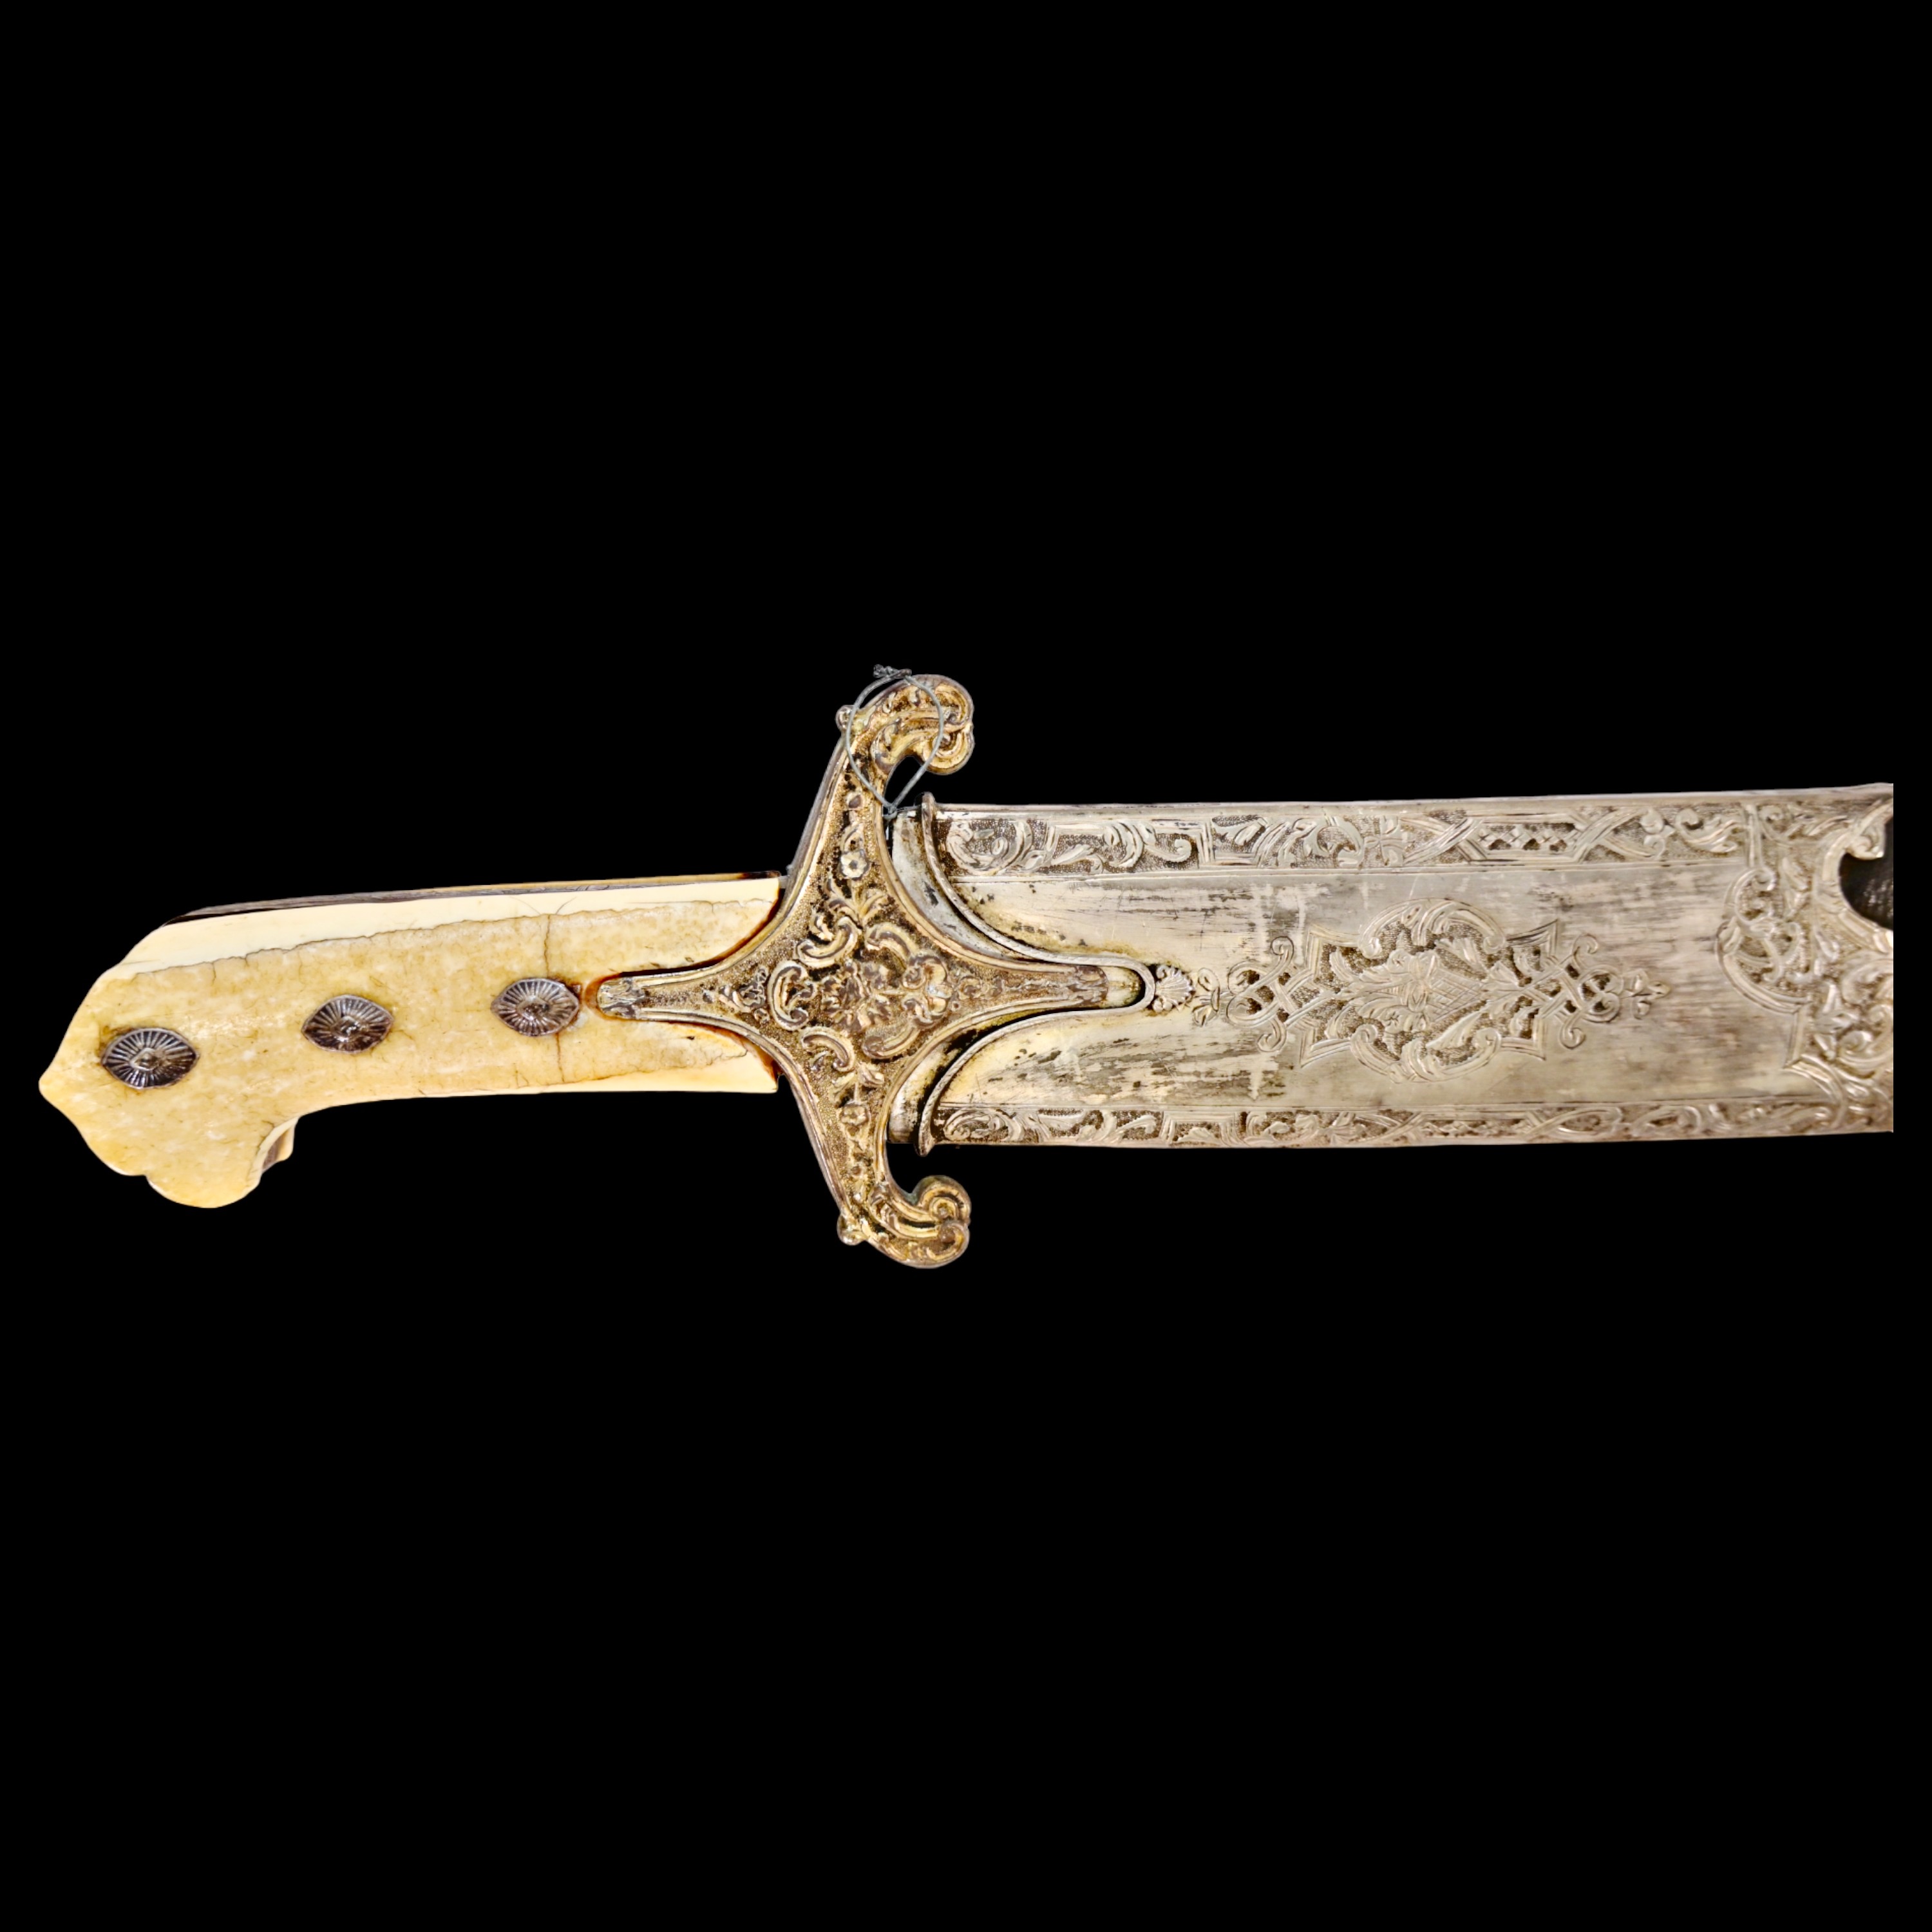 Rare Ottoman saber KARABELA, wootz blade, silver with the tugra of Sultan Ahmed III, early 18th C. - Image 4 of 27